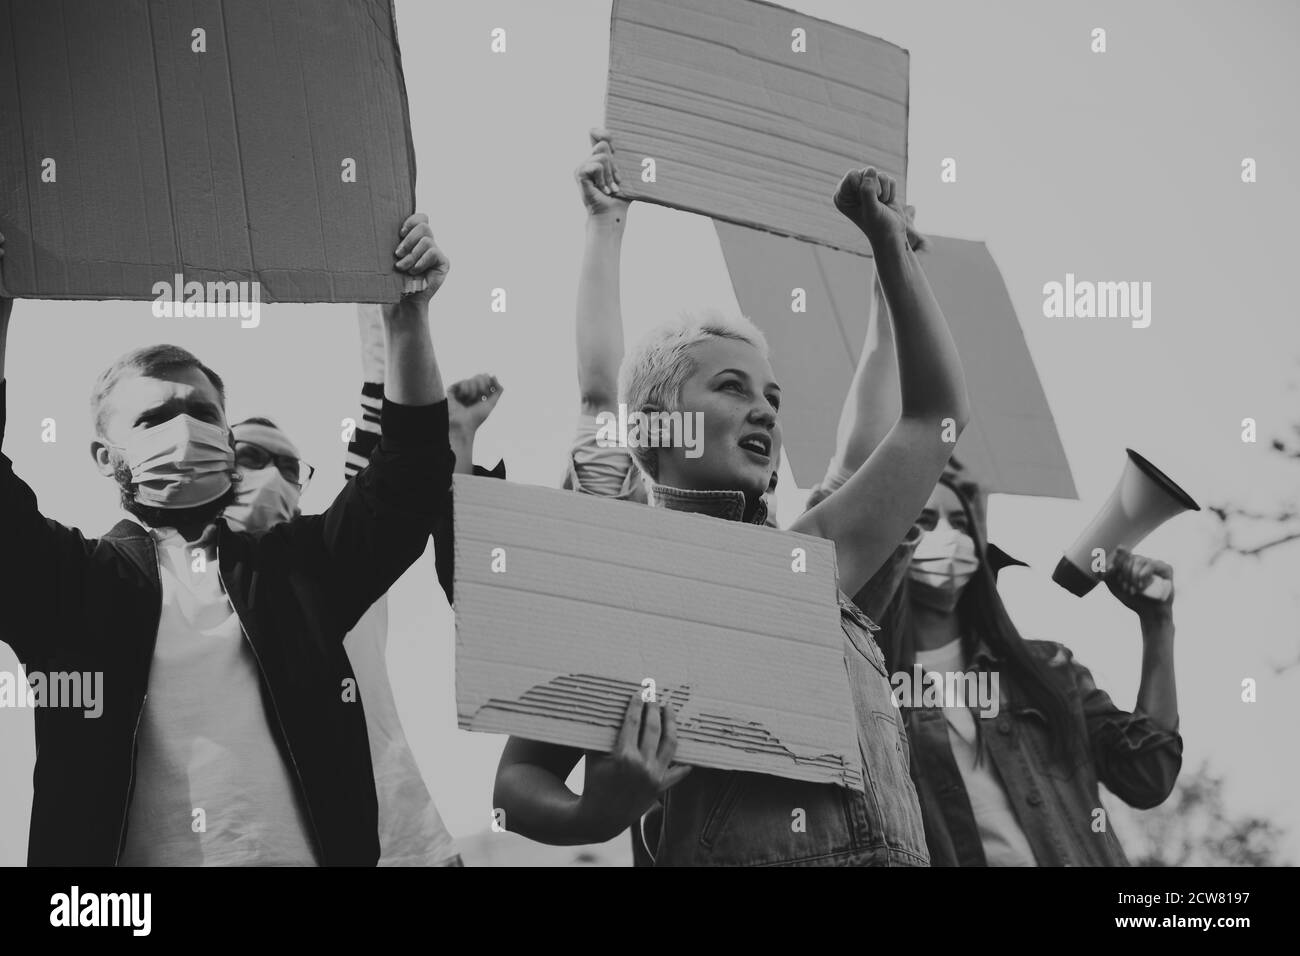 Black and white. Group of activists giving slogans in a rally. Caucasian men and women marching together in a protest in the city. Look angry, hopeful, confident. Blank banners for your design or ad. Stock Photo